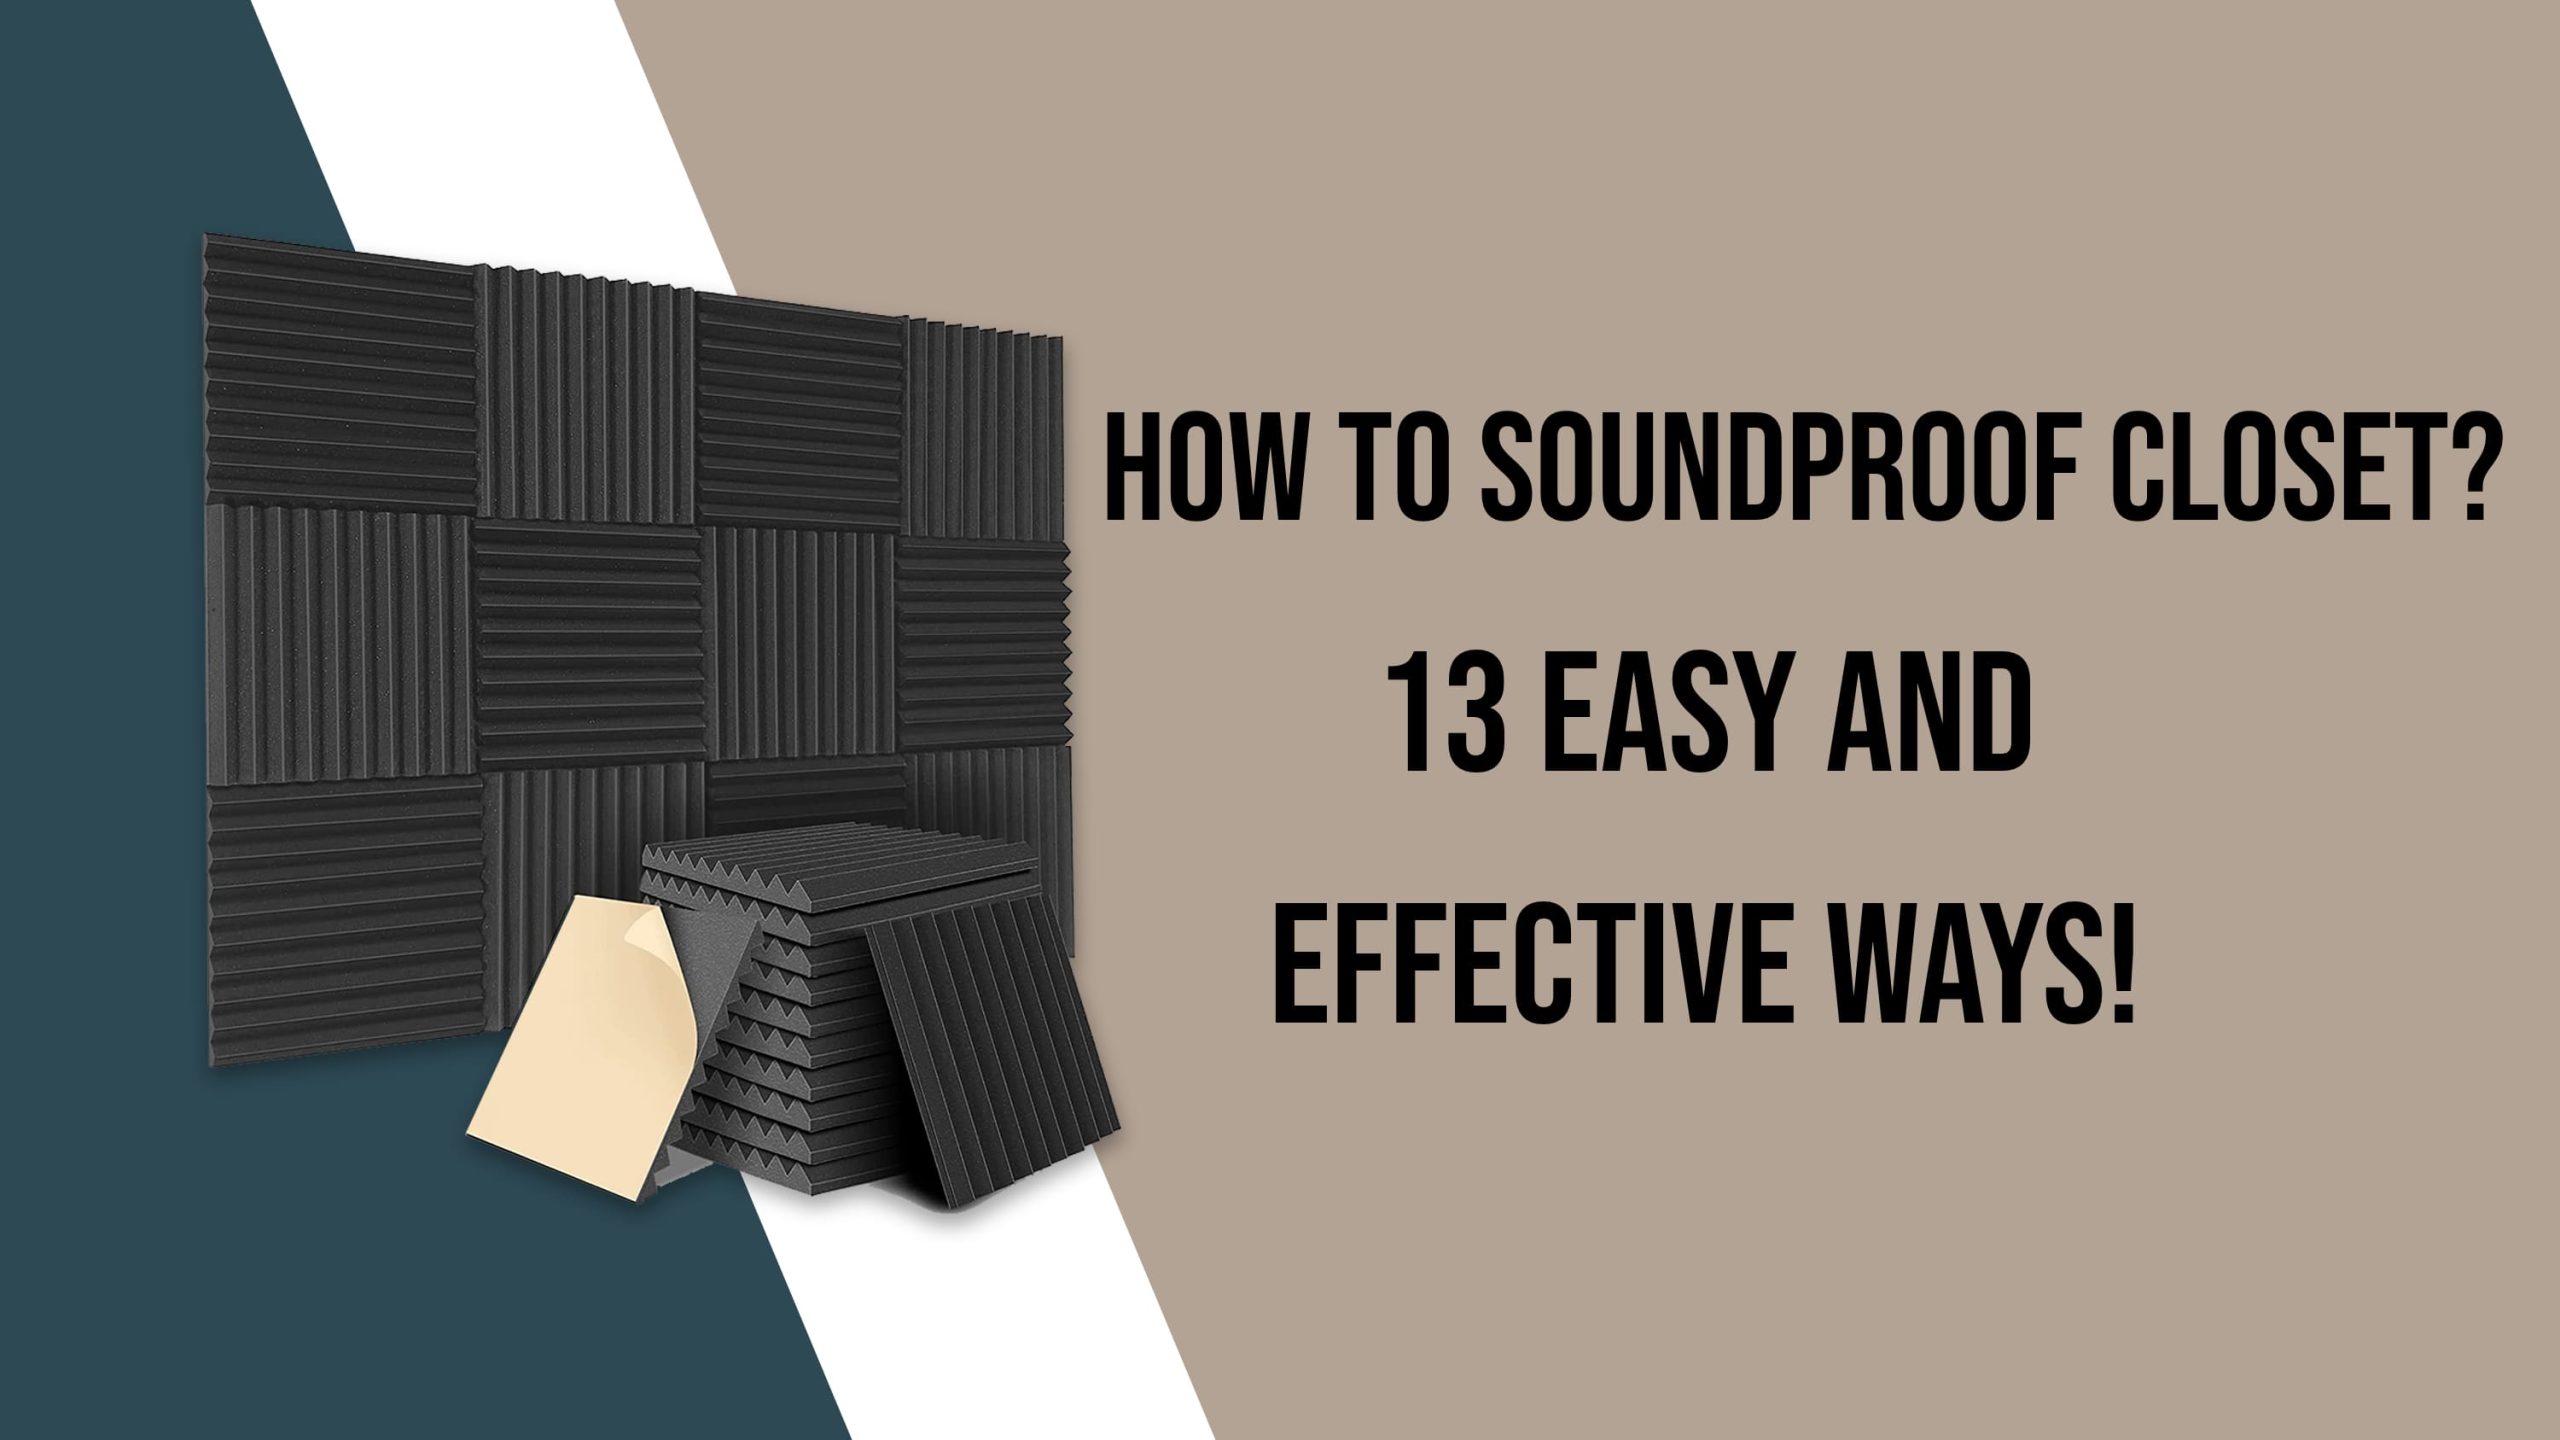 How to Soundproof Closet